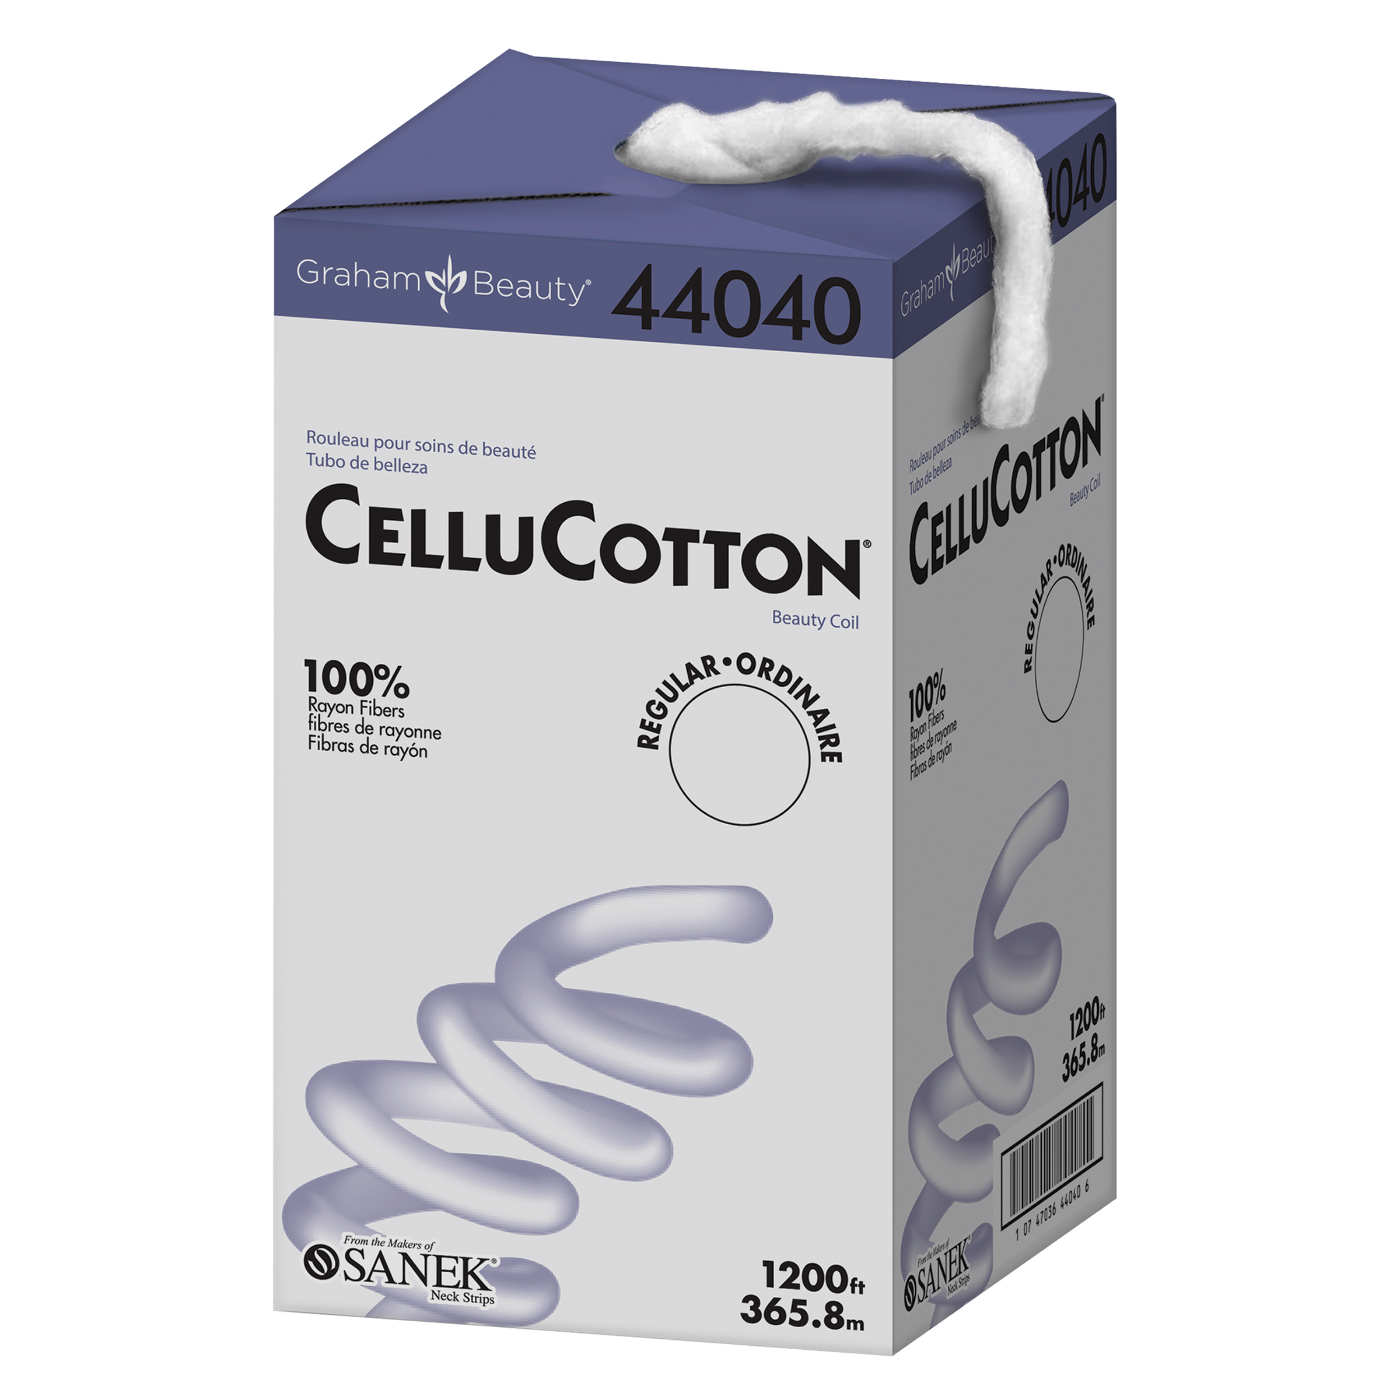 CelluCotton® Beauty Coil Rayon, 1200 ft.